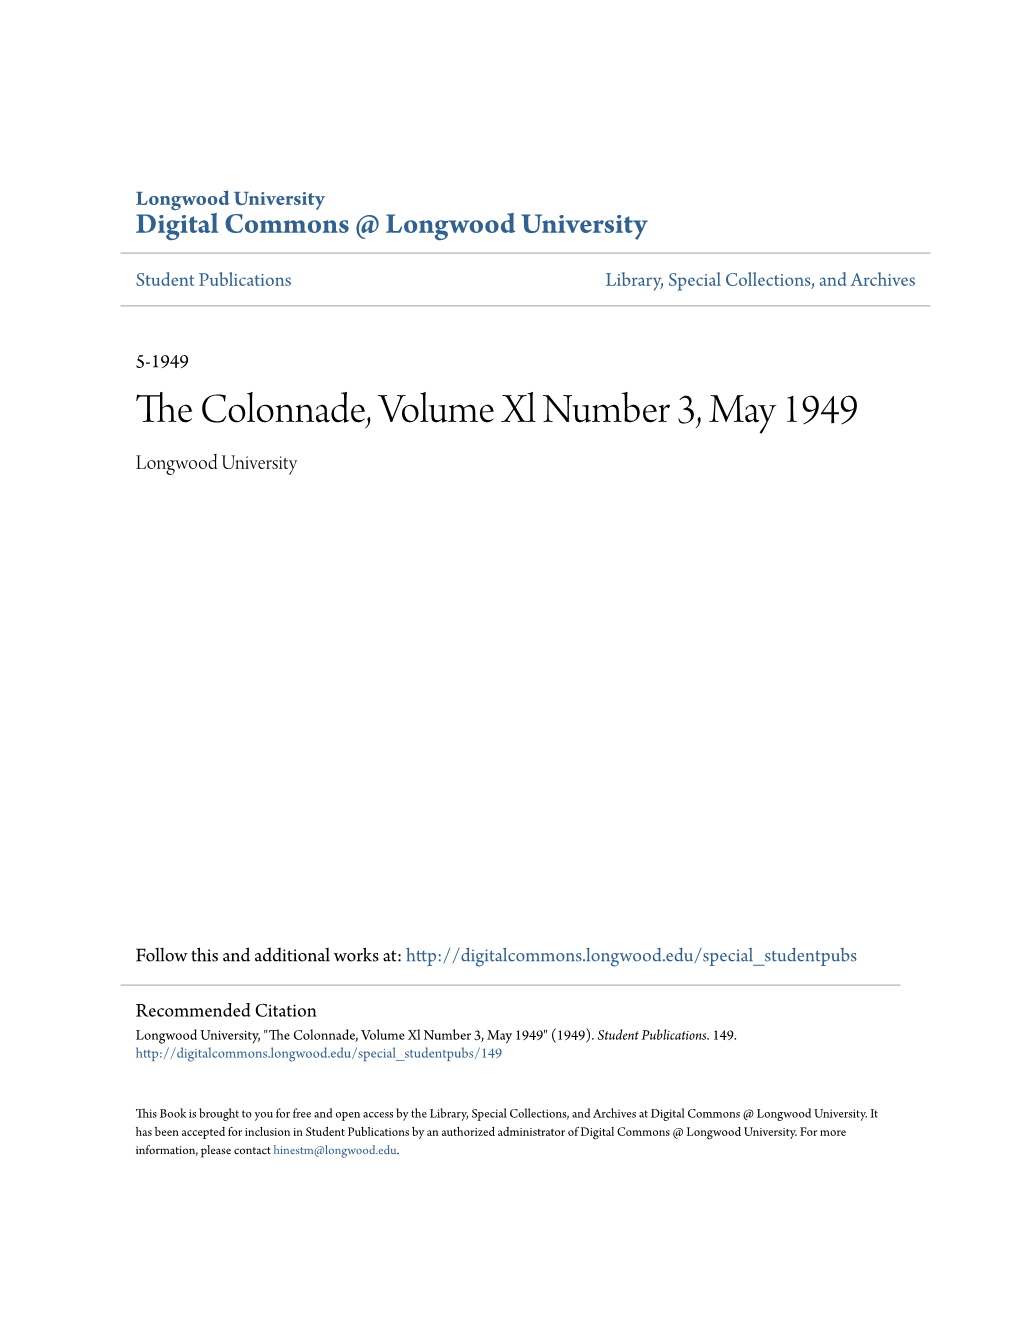 The Colonnade, Volume Xl Number 3, May 1949